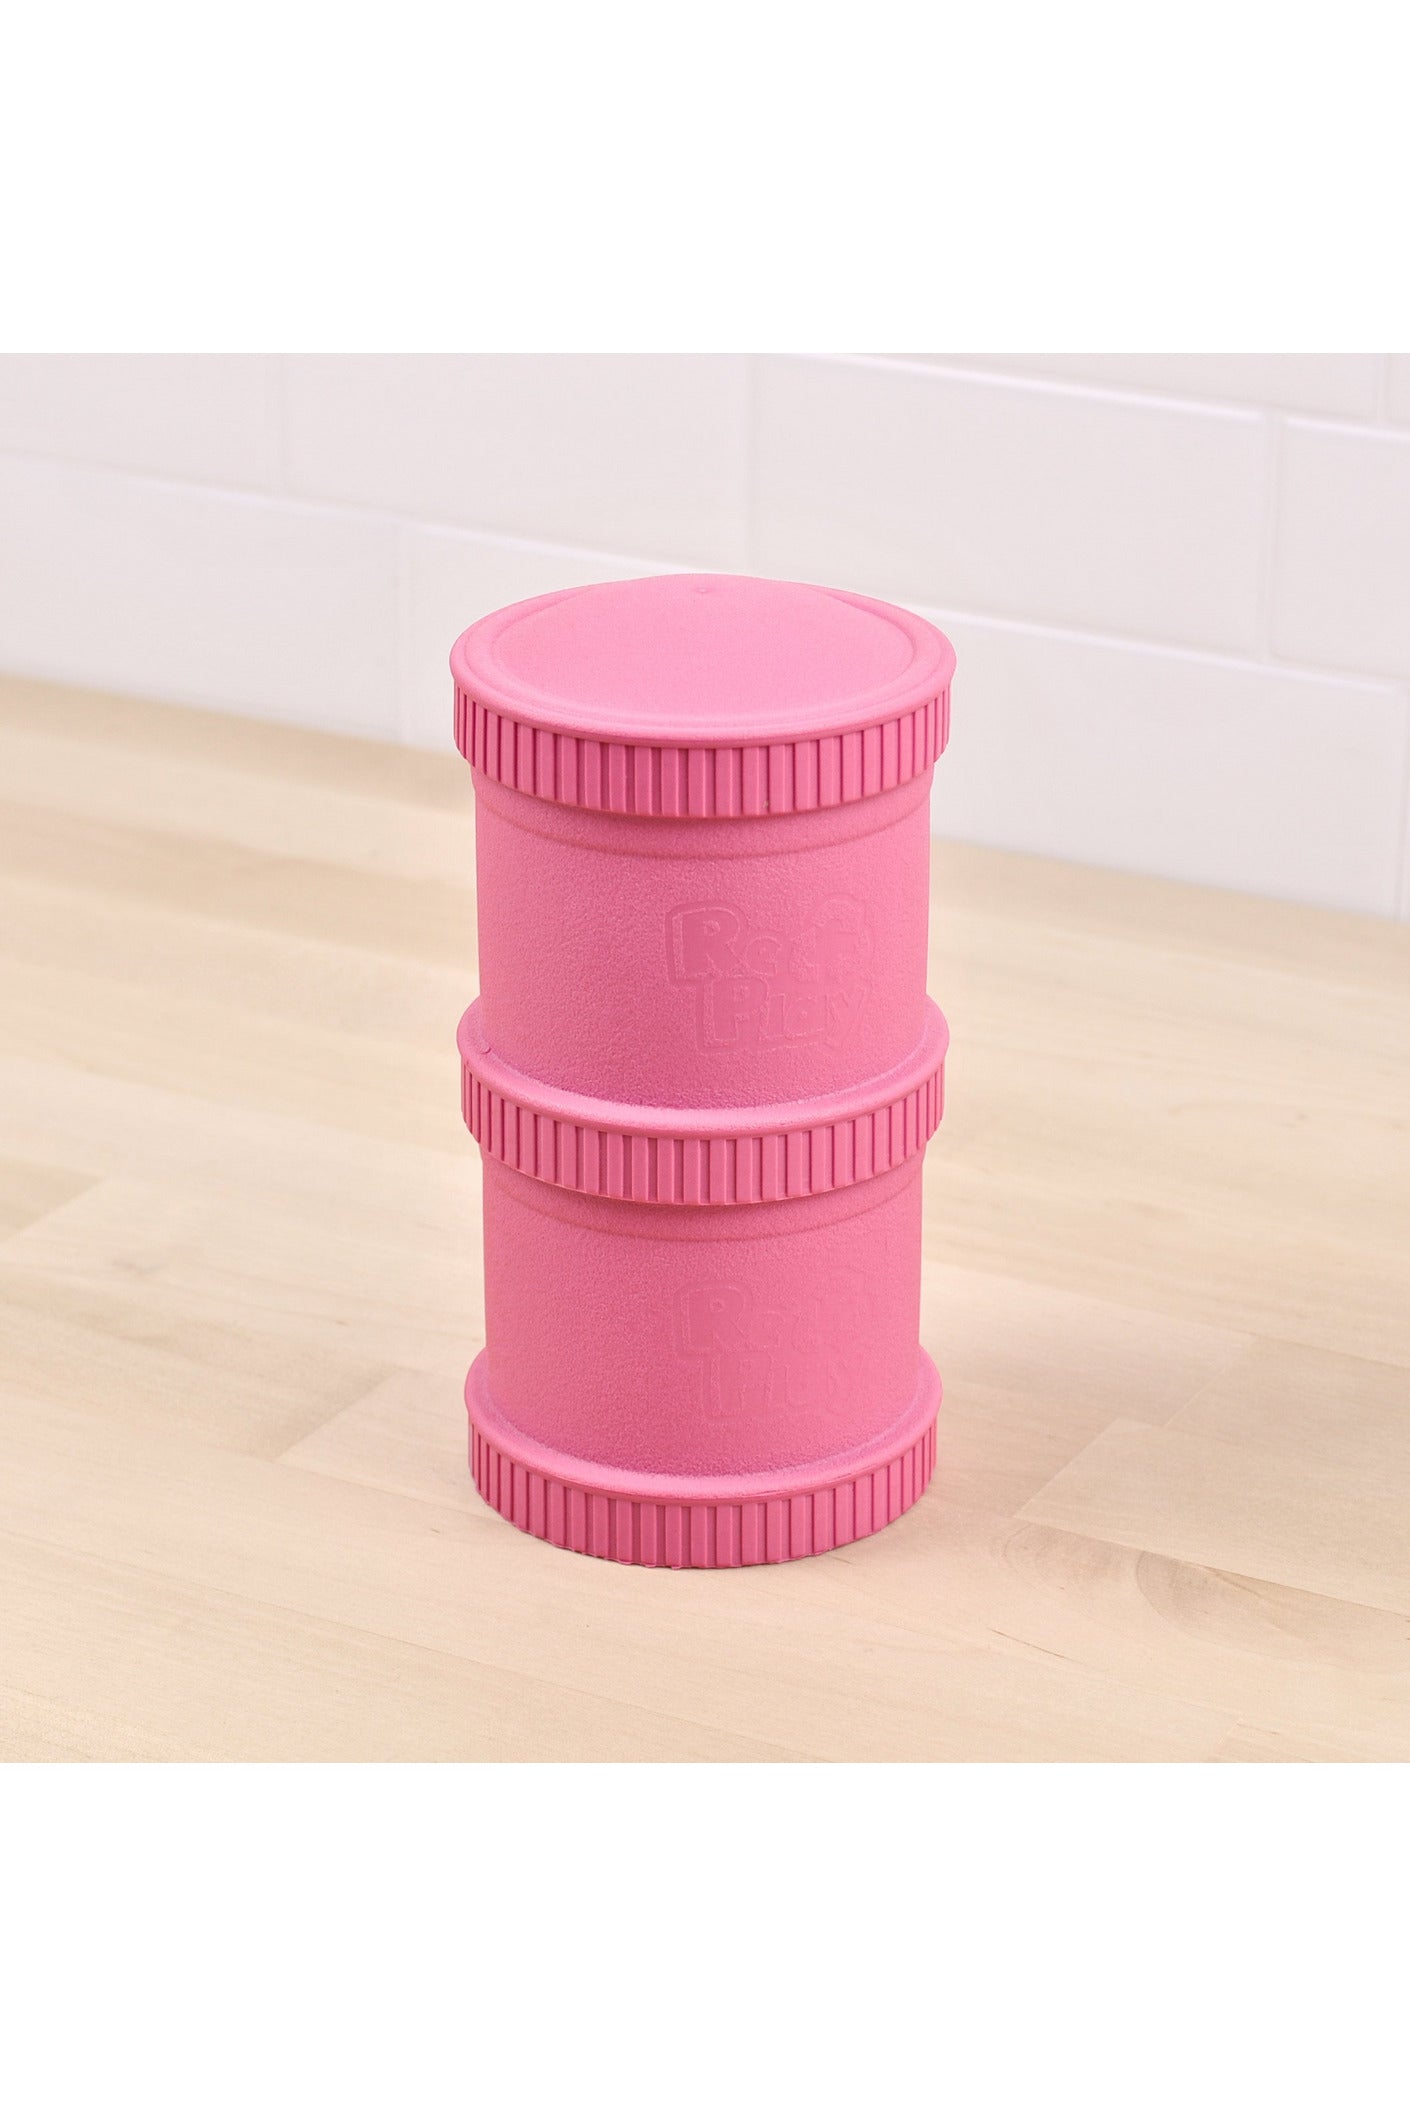 Re-Play Snack Stack (2 Pods and 1 Lid NO Retail Packaging) - Bright Pink